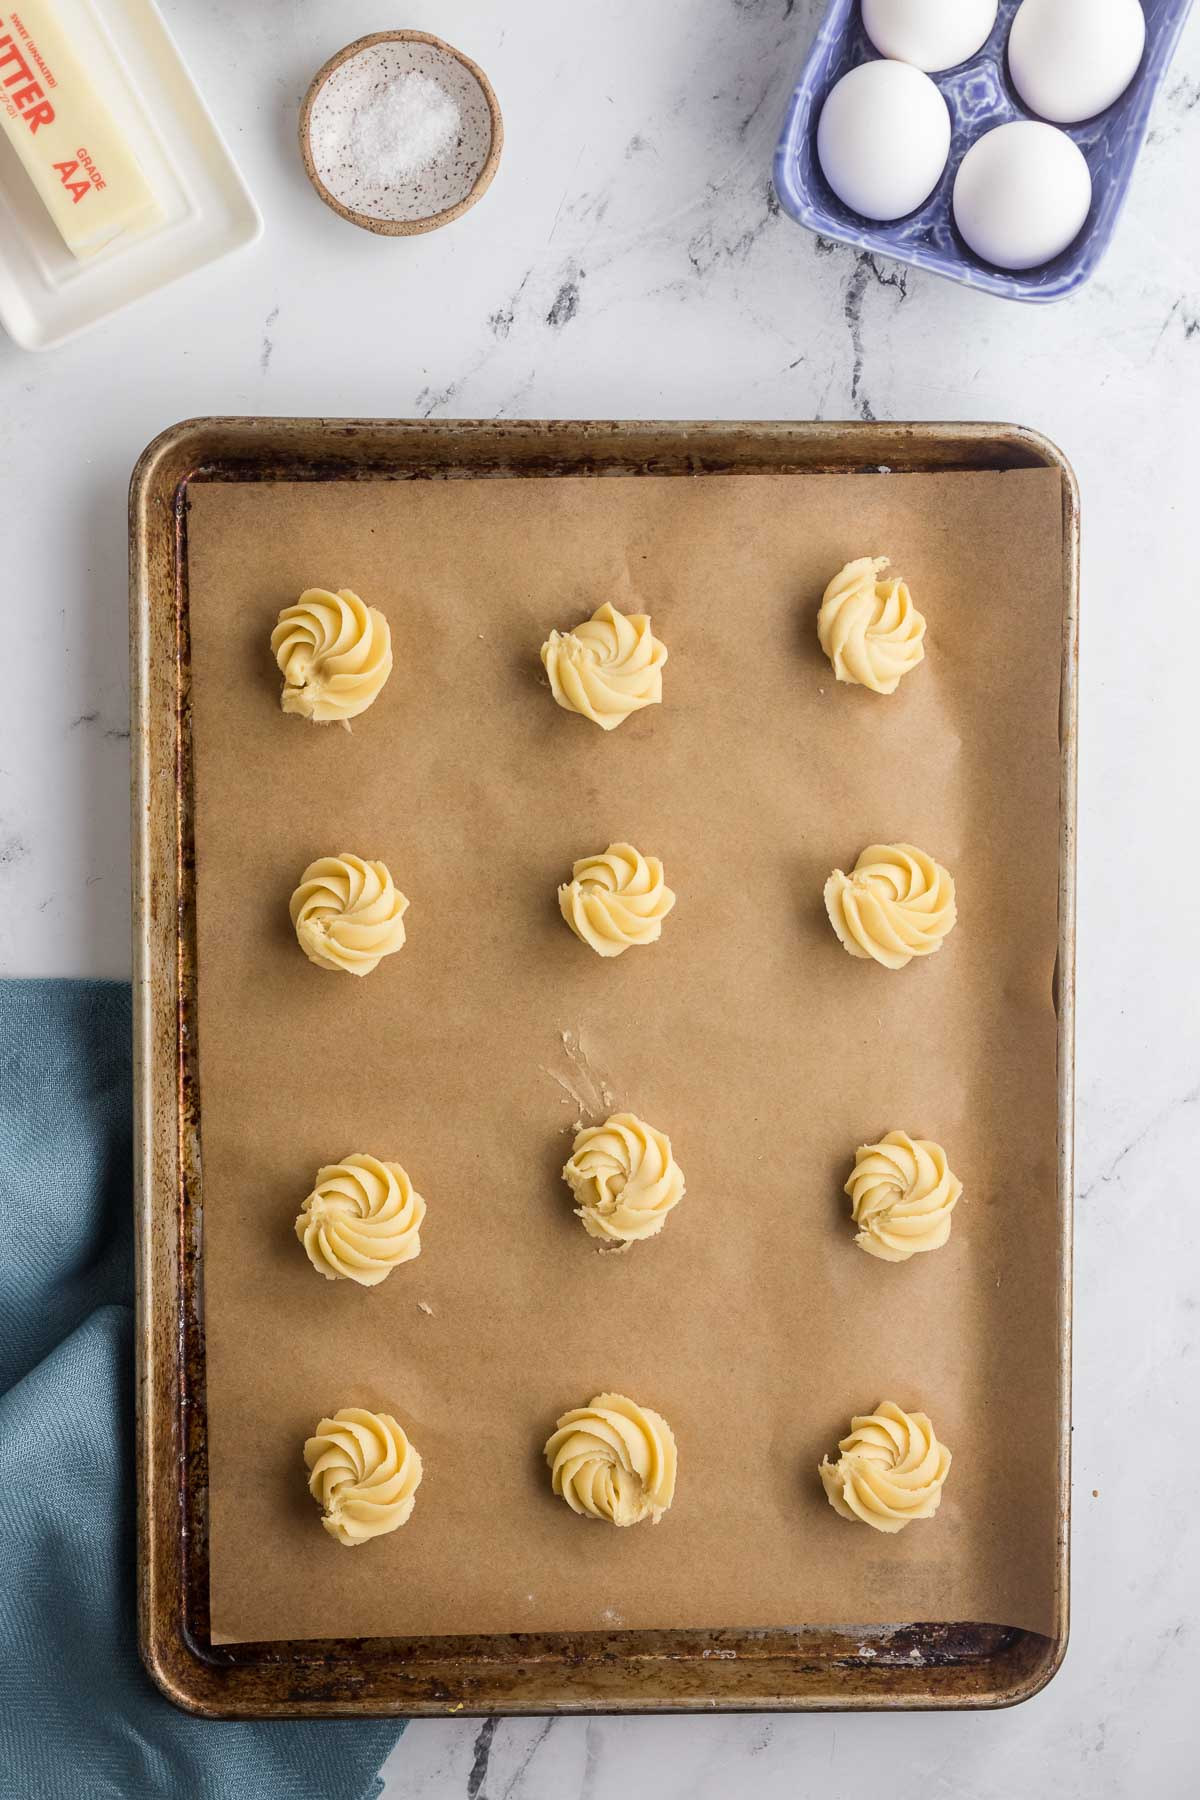 piped unbaked butter cookies on baking sheet